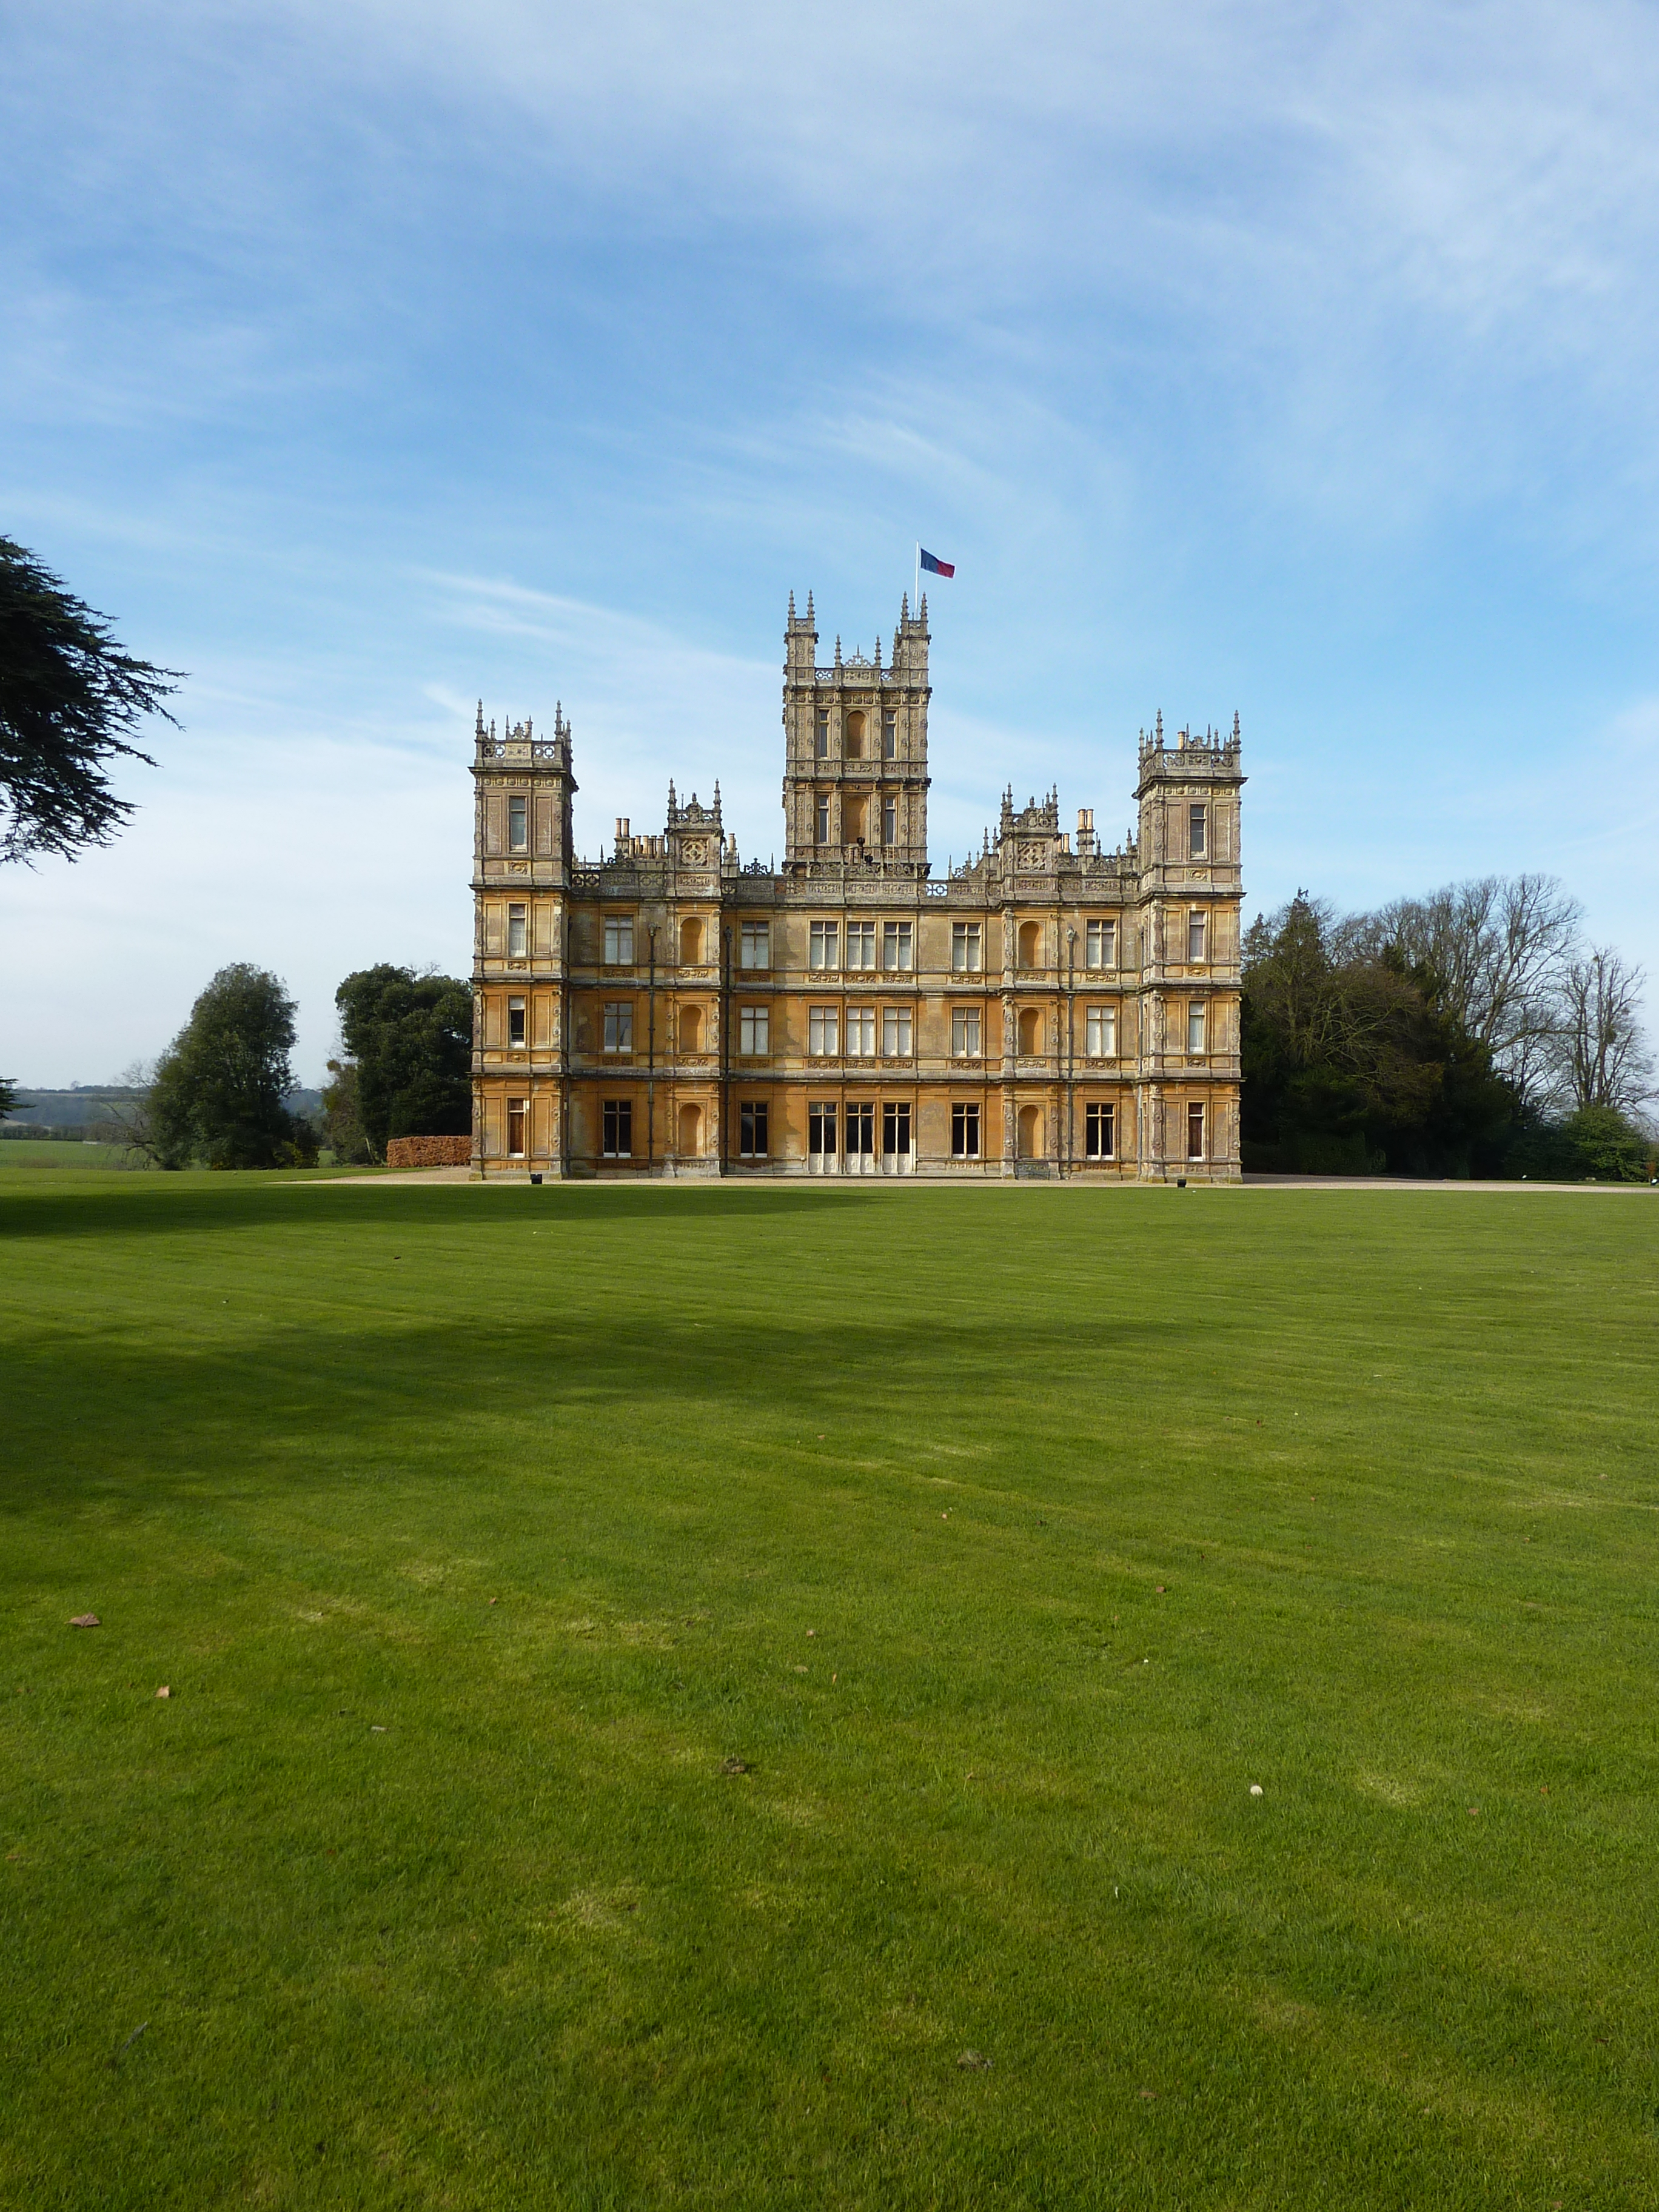 Highclere Castle, the site of the TV drama "Downton Abbey'